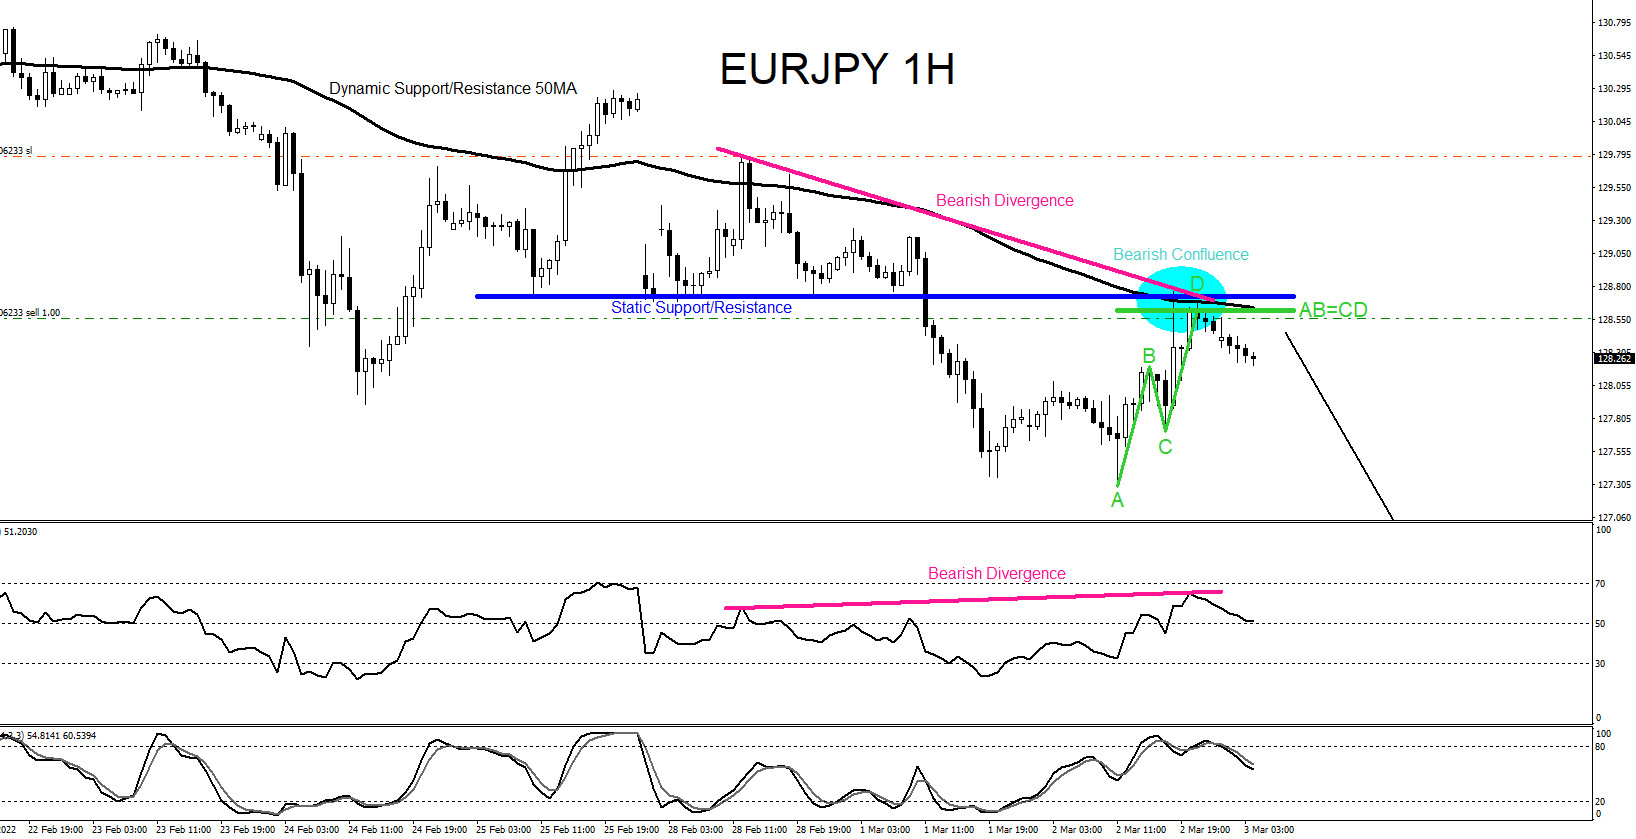 EURJPY : Market Patterns Signalled the Move Lower